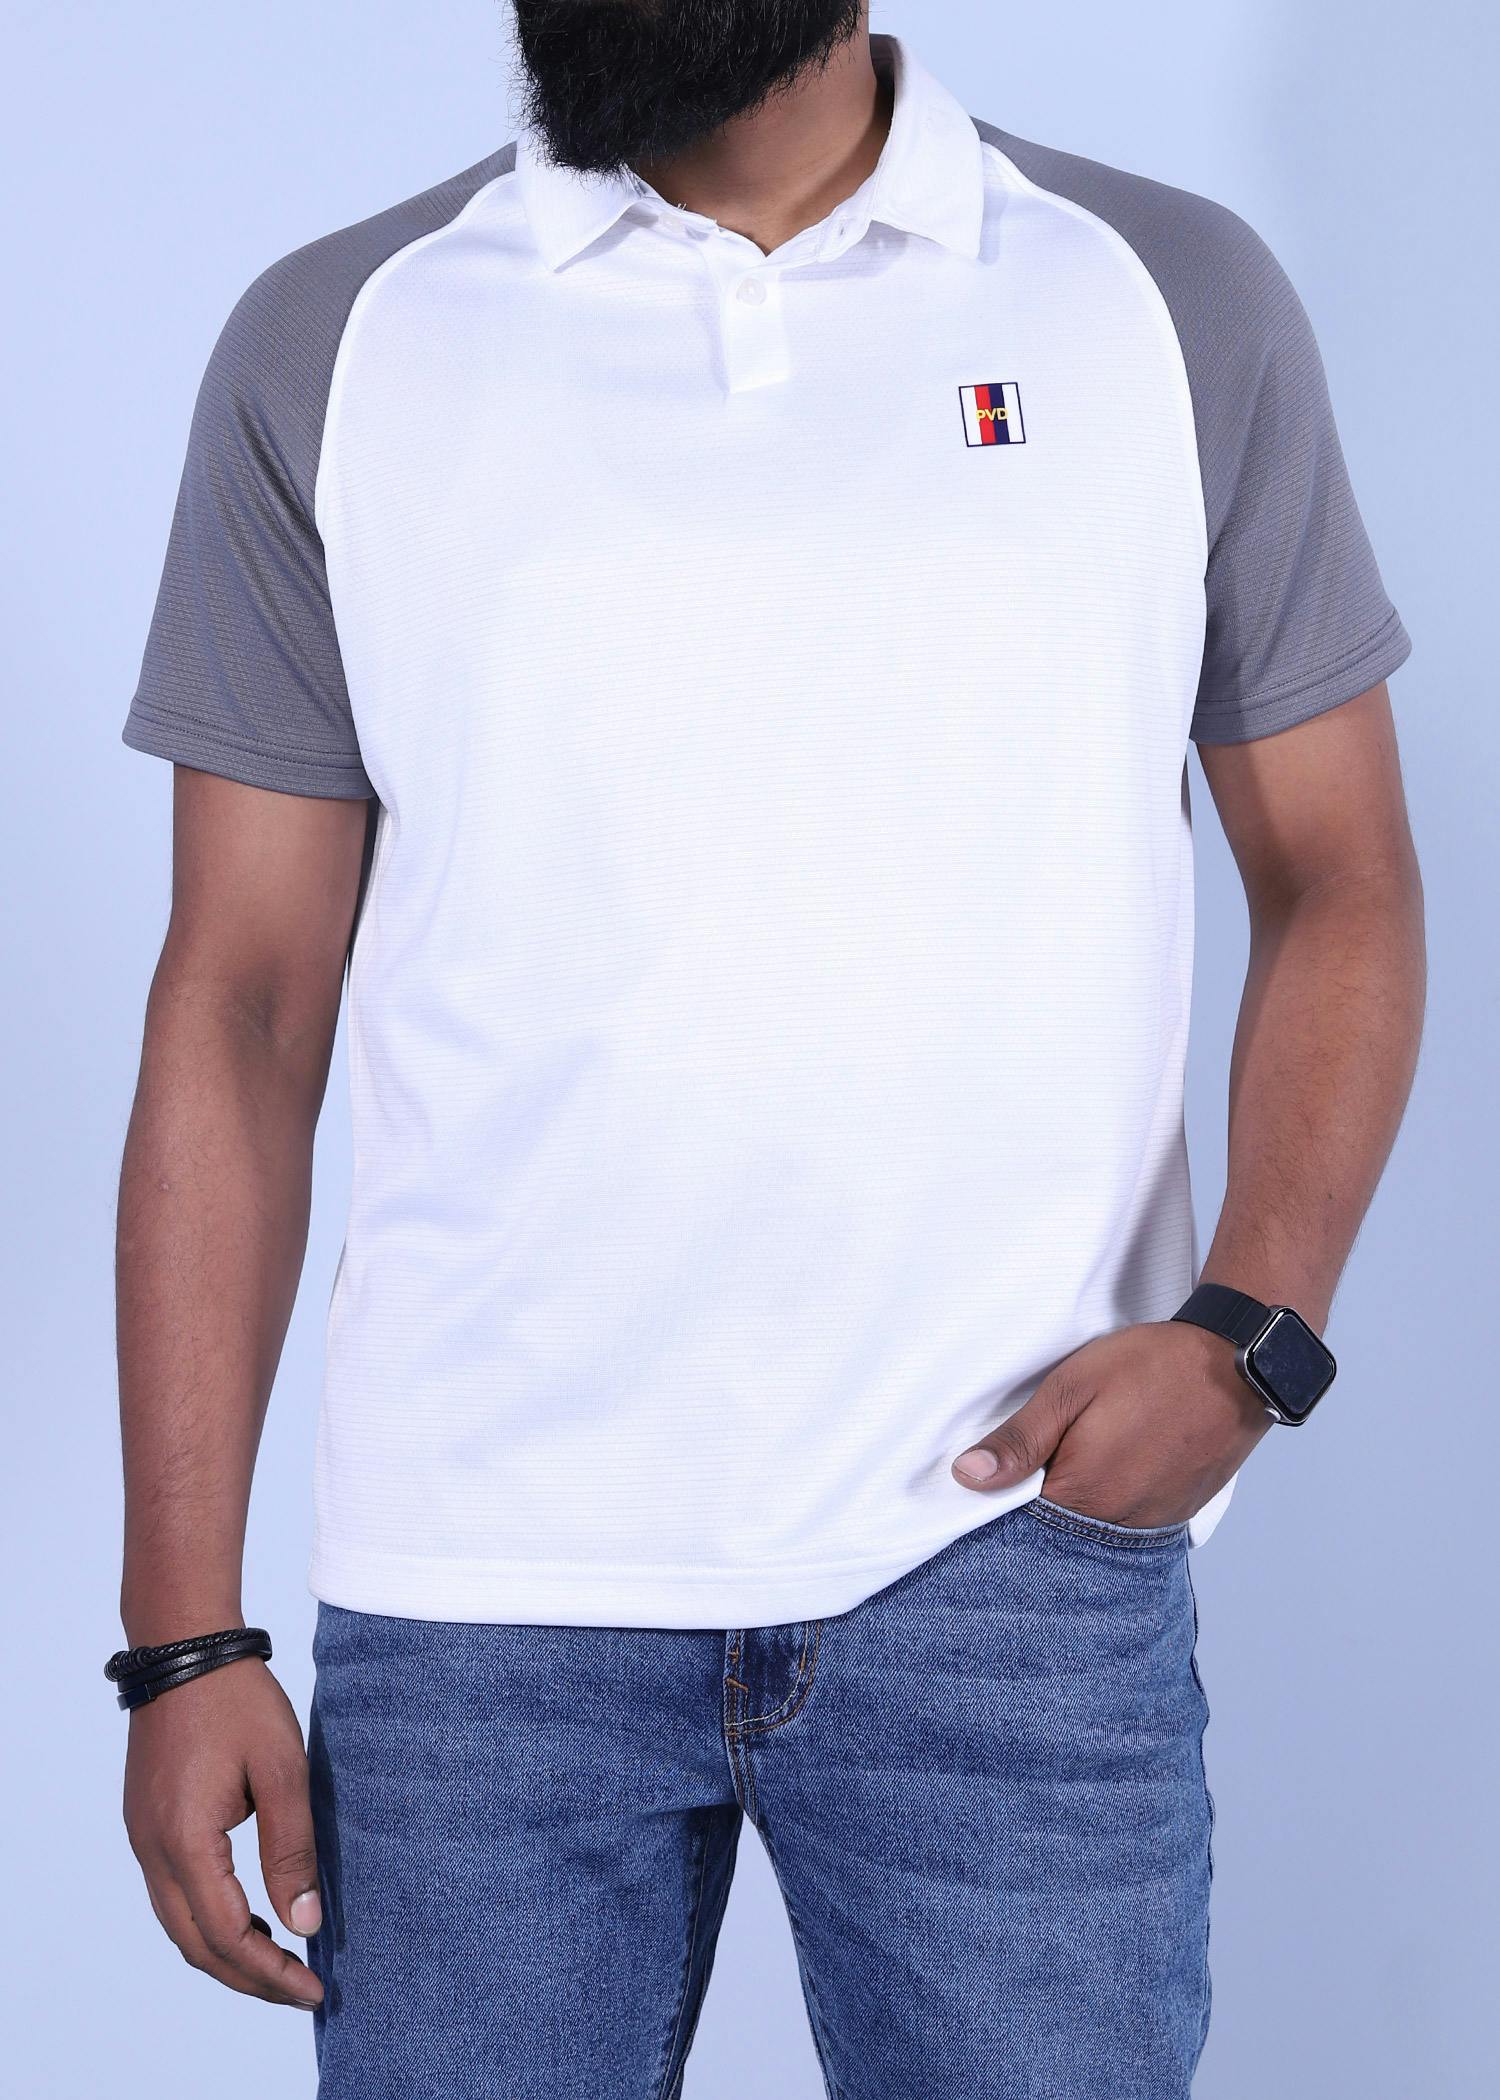 holfman polo white grey color half front view